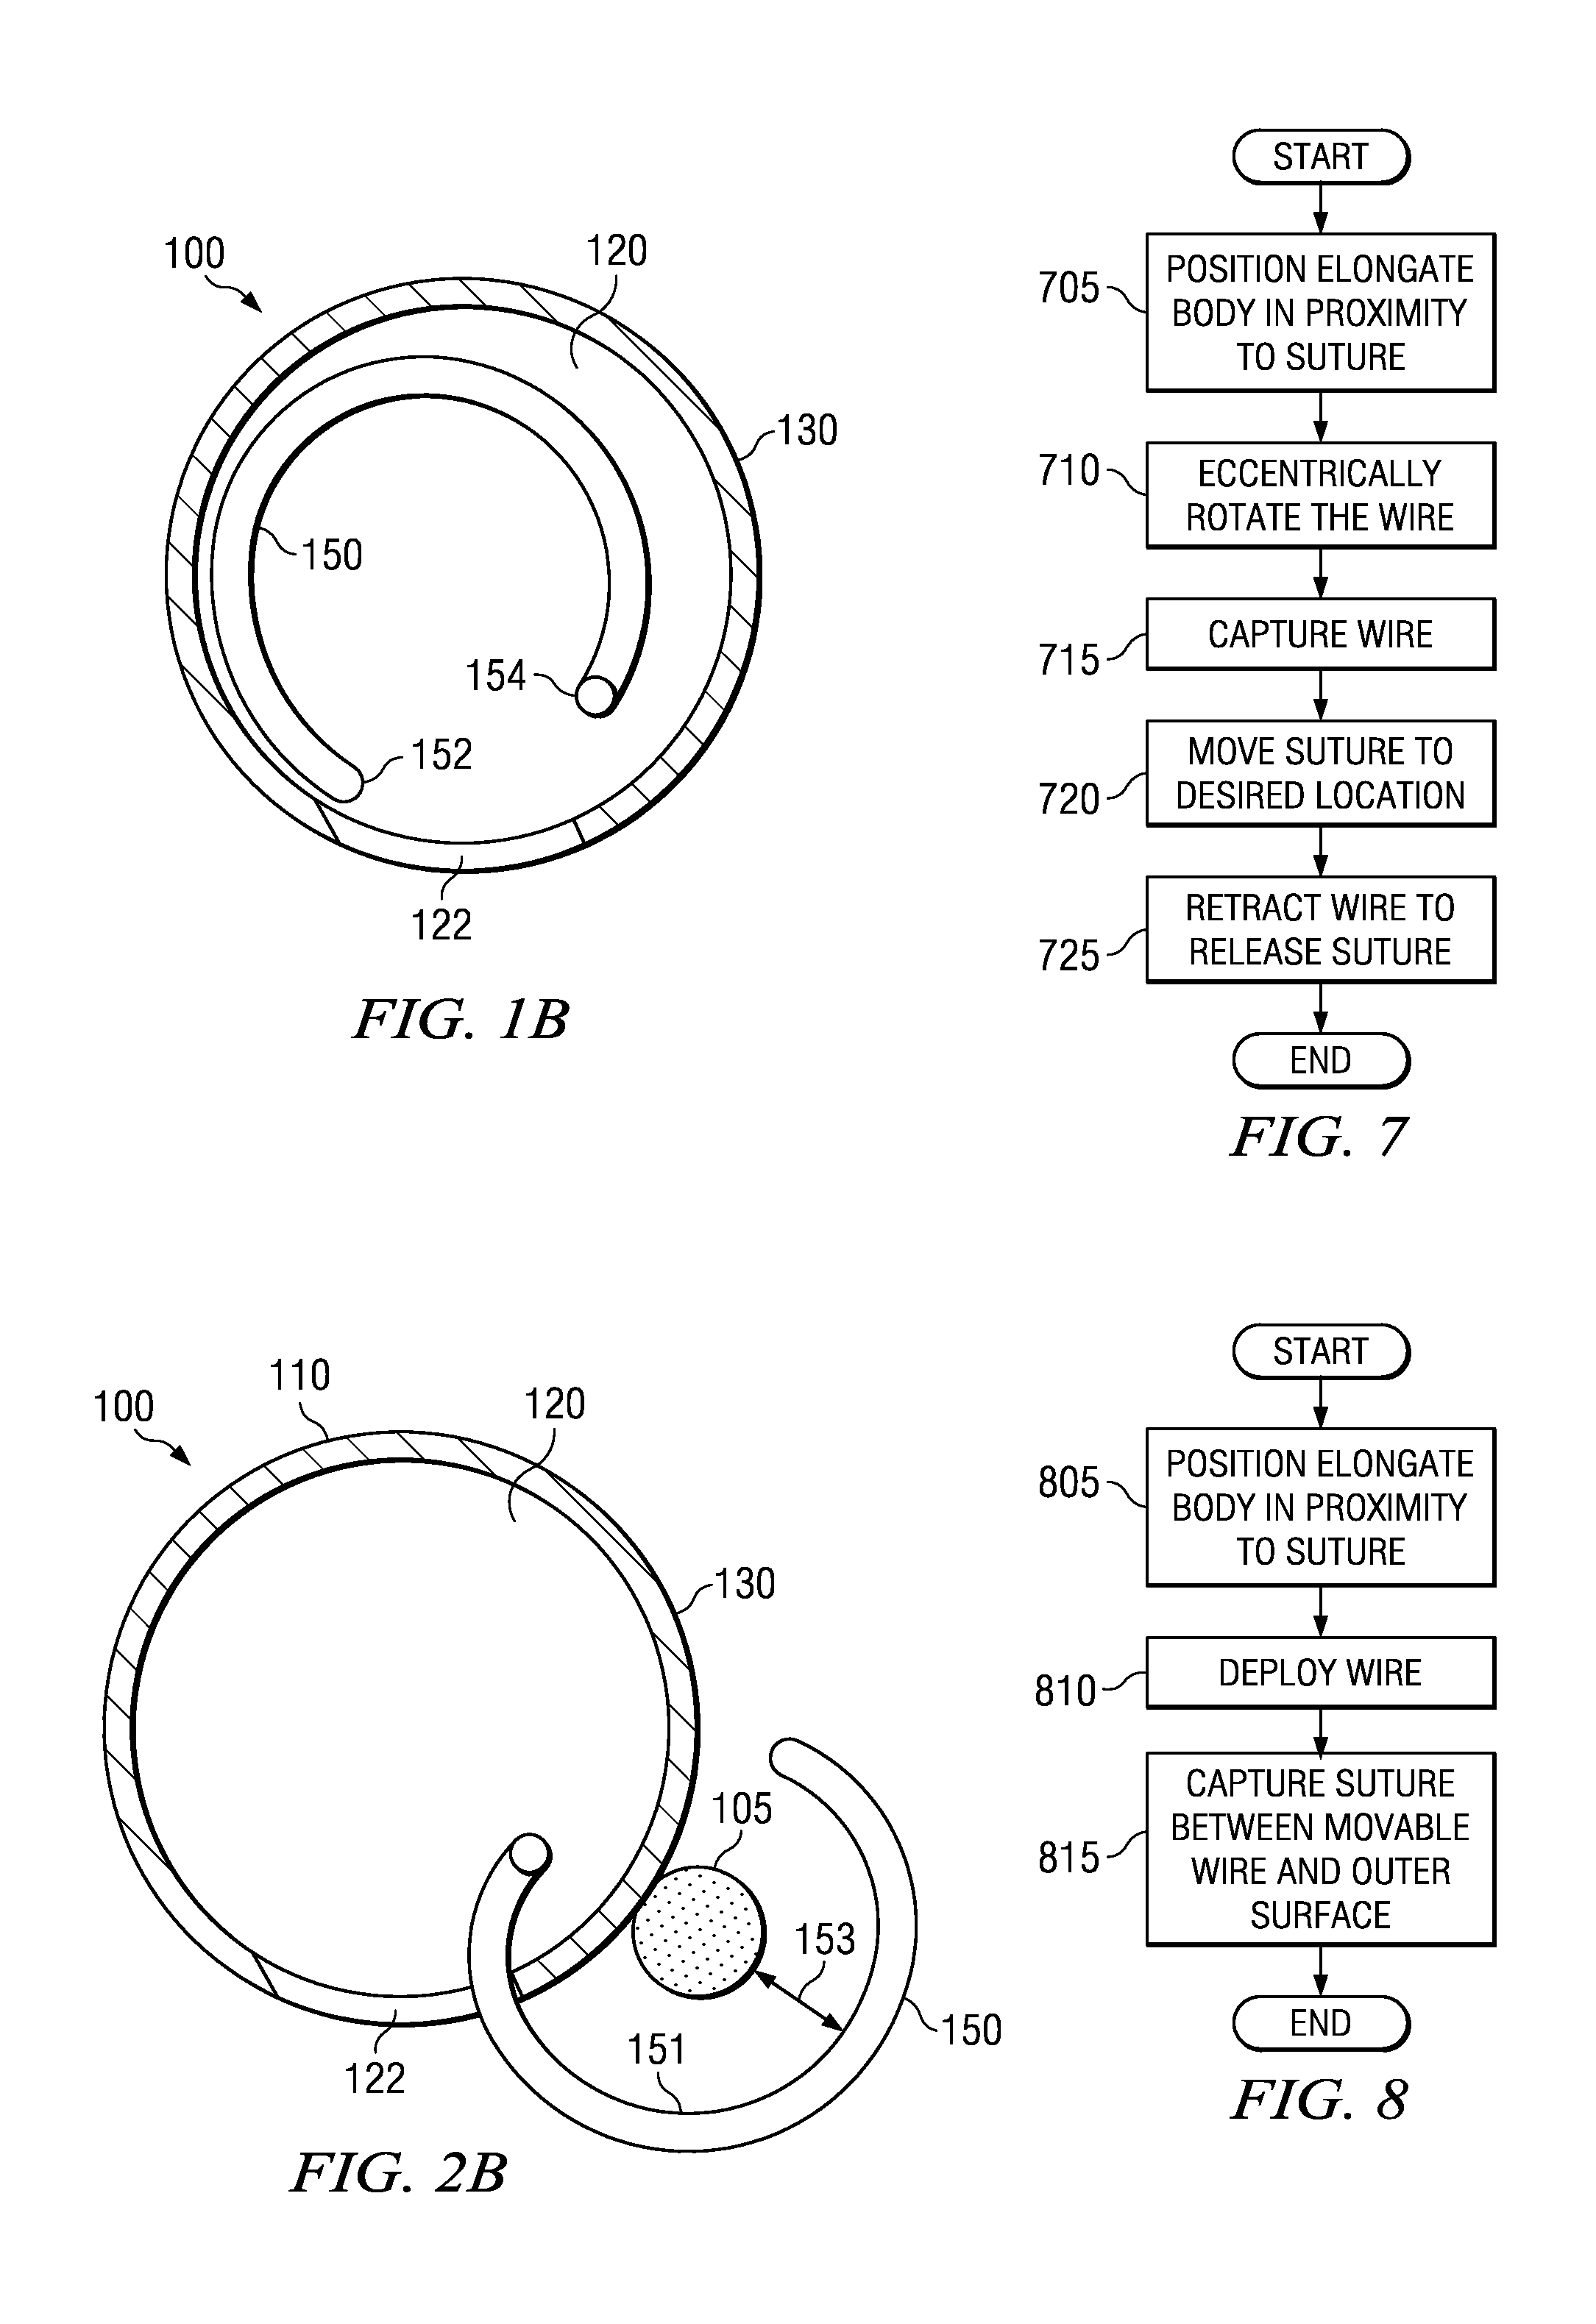 Surgical instrument for manipulating surgical suture and methods of use